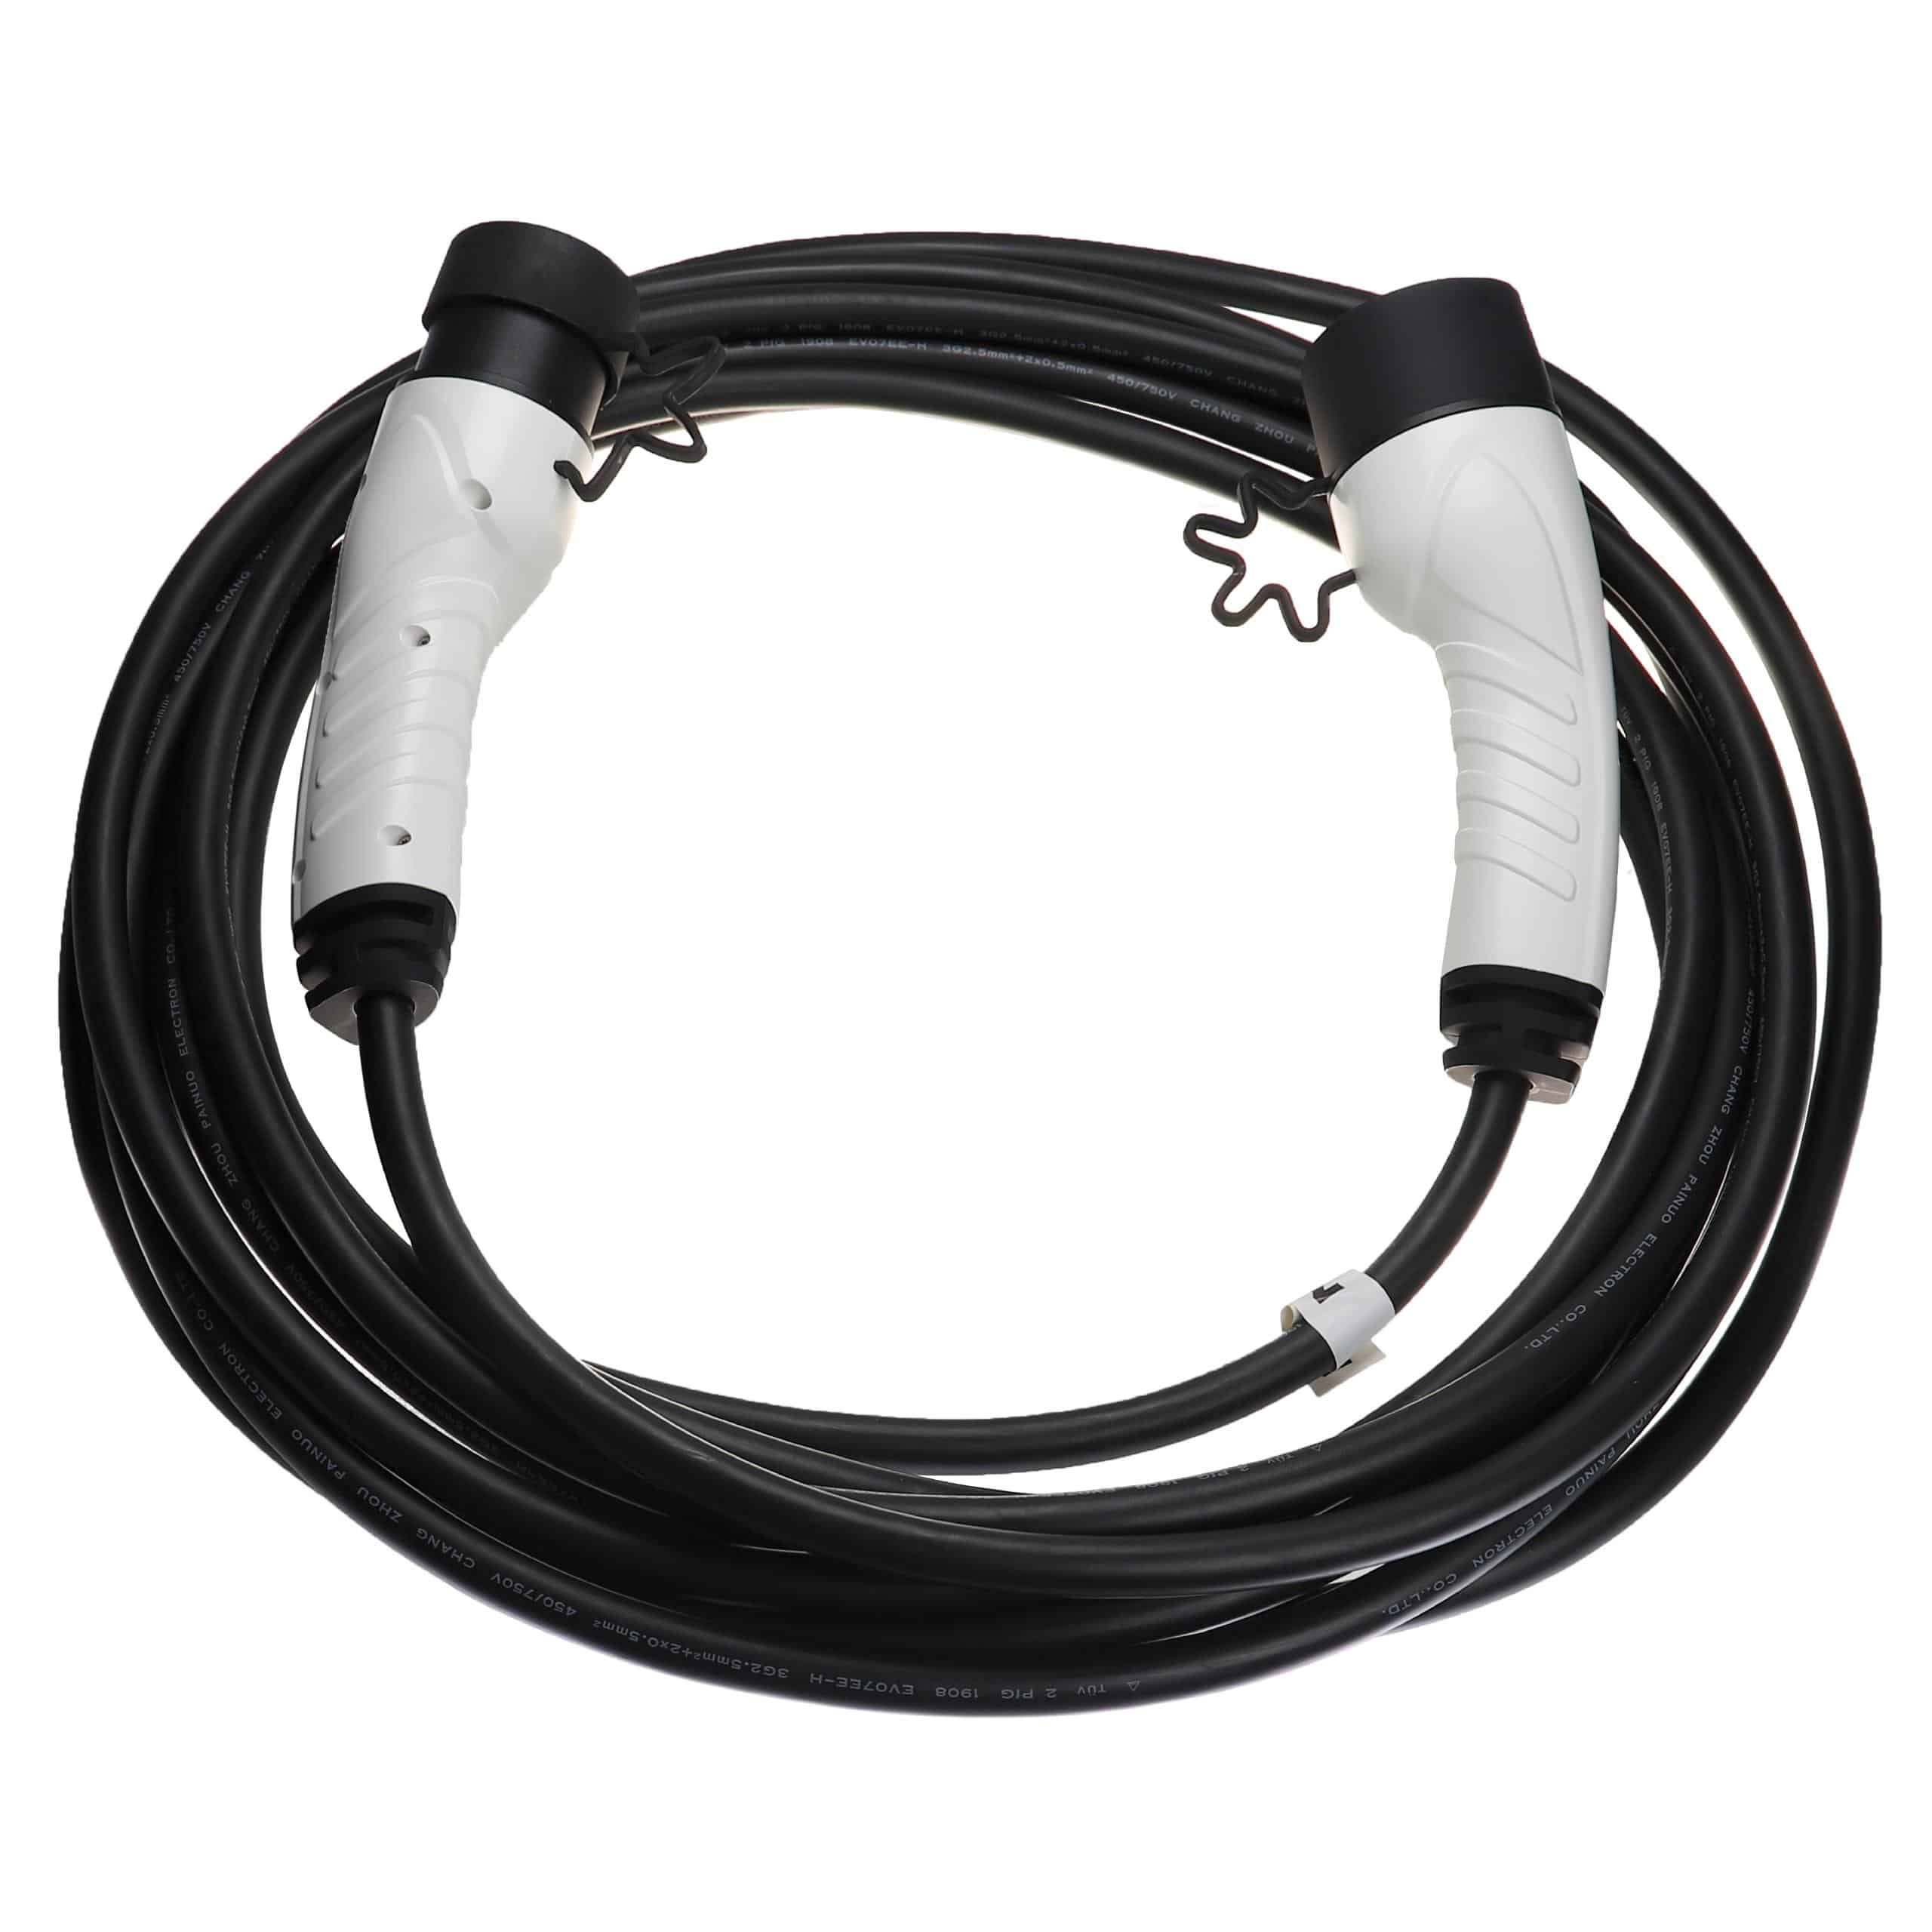 Charging Cable for Electric Car, Plug-In Hybrid - Type 2 to Type 2 Cable, Single-Phase, 16 A, 3.5 kW, 7 m